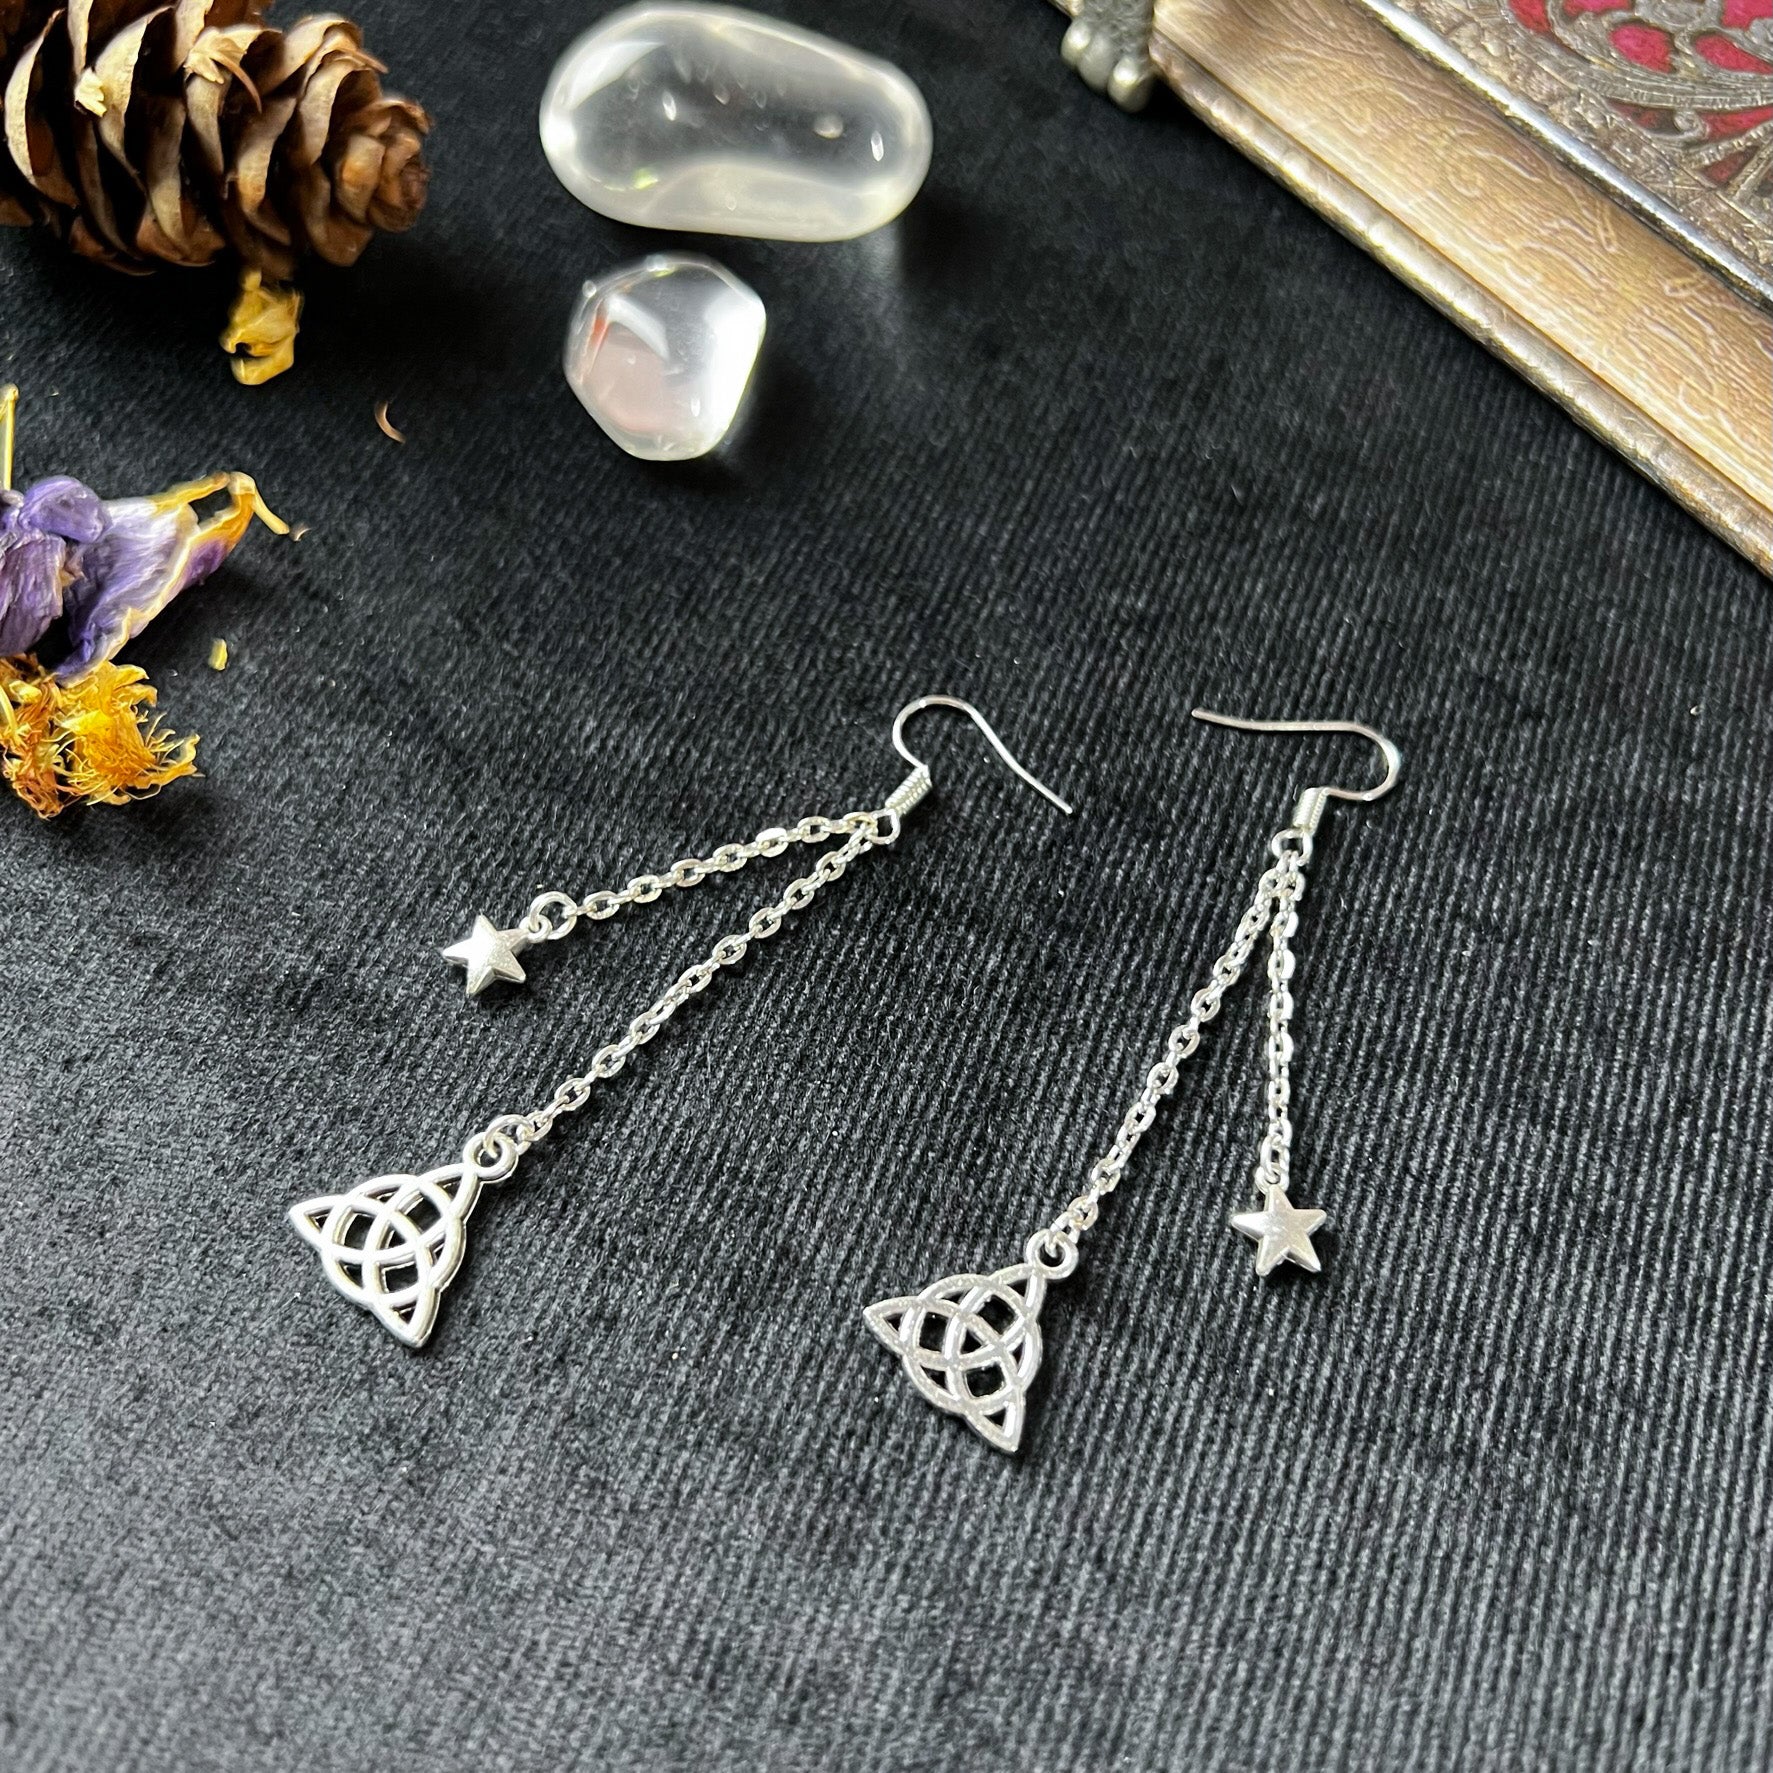 Trinity Celtic knot triquetra and stars earrings Baguette Magick